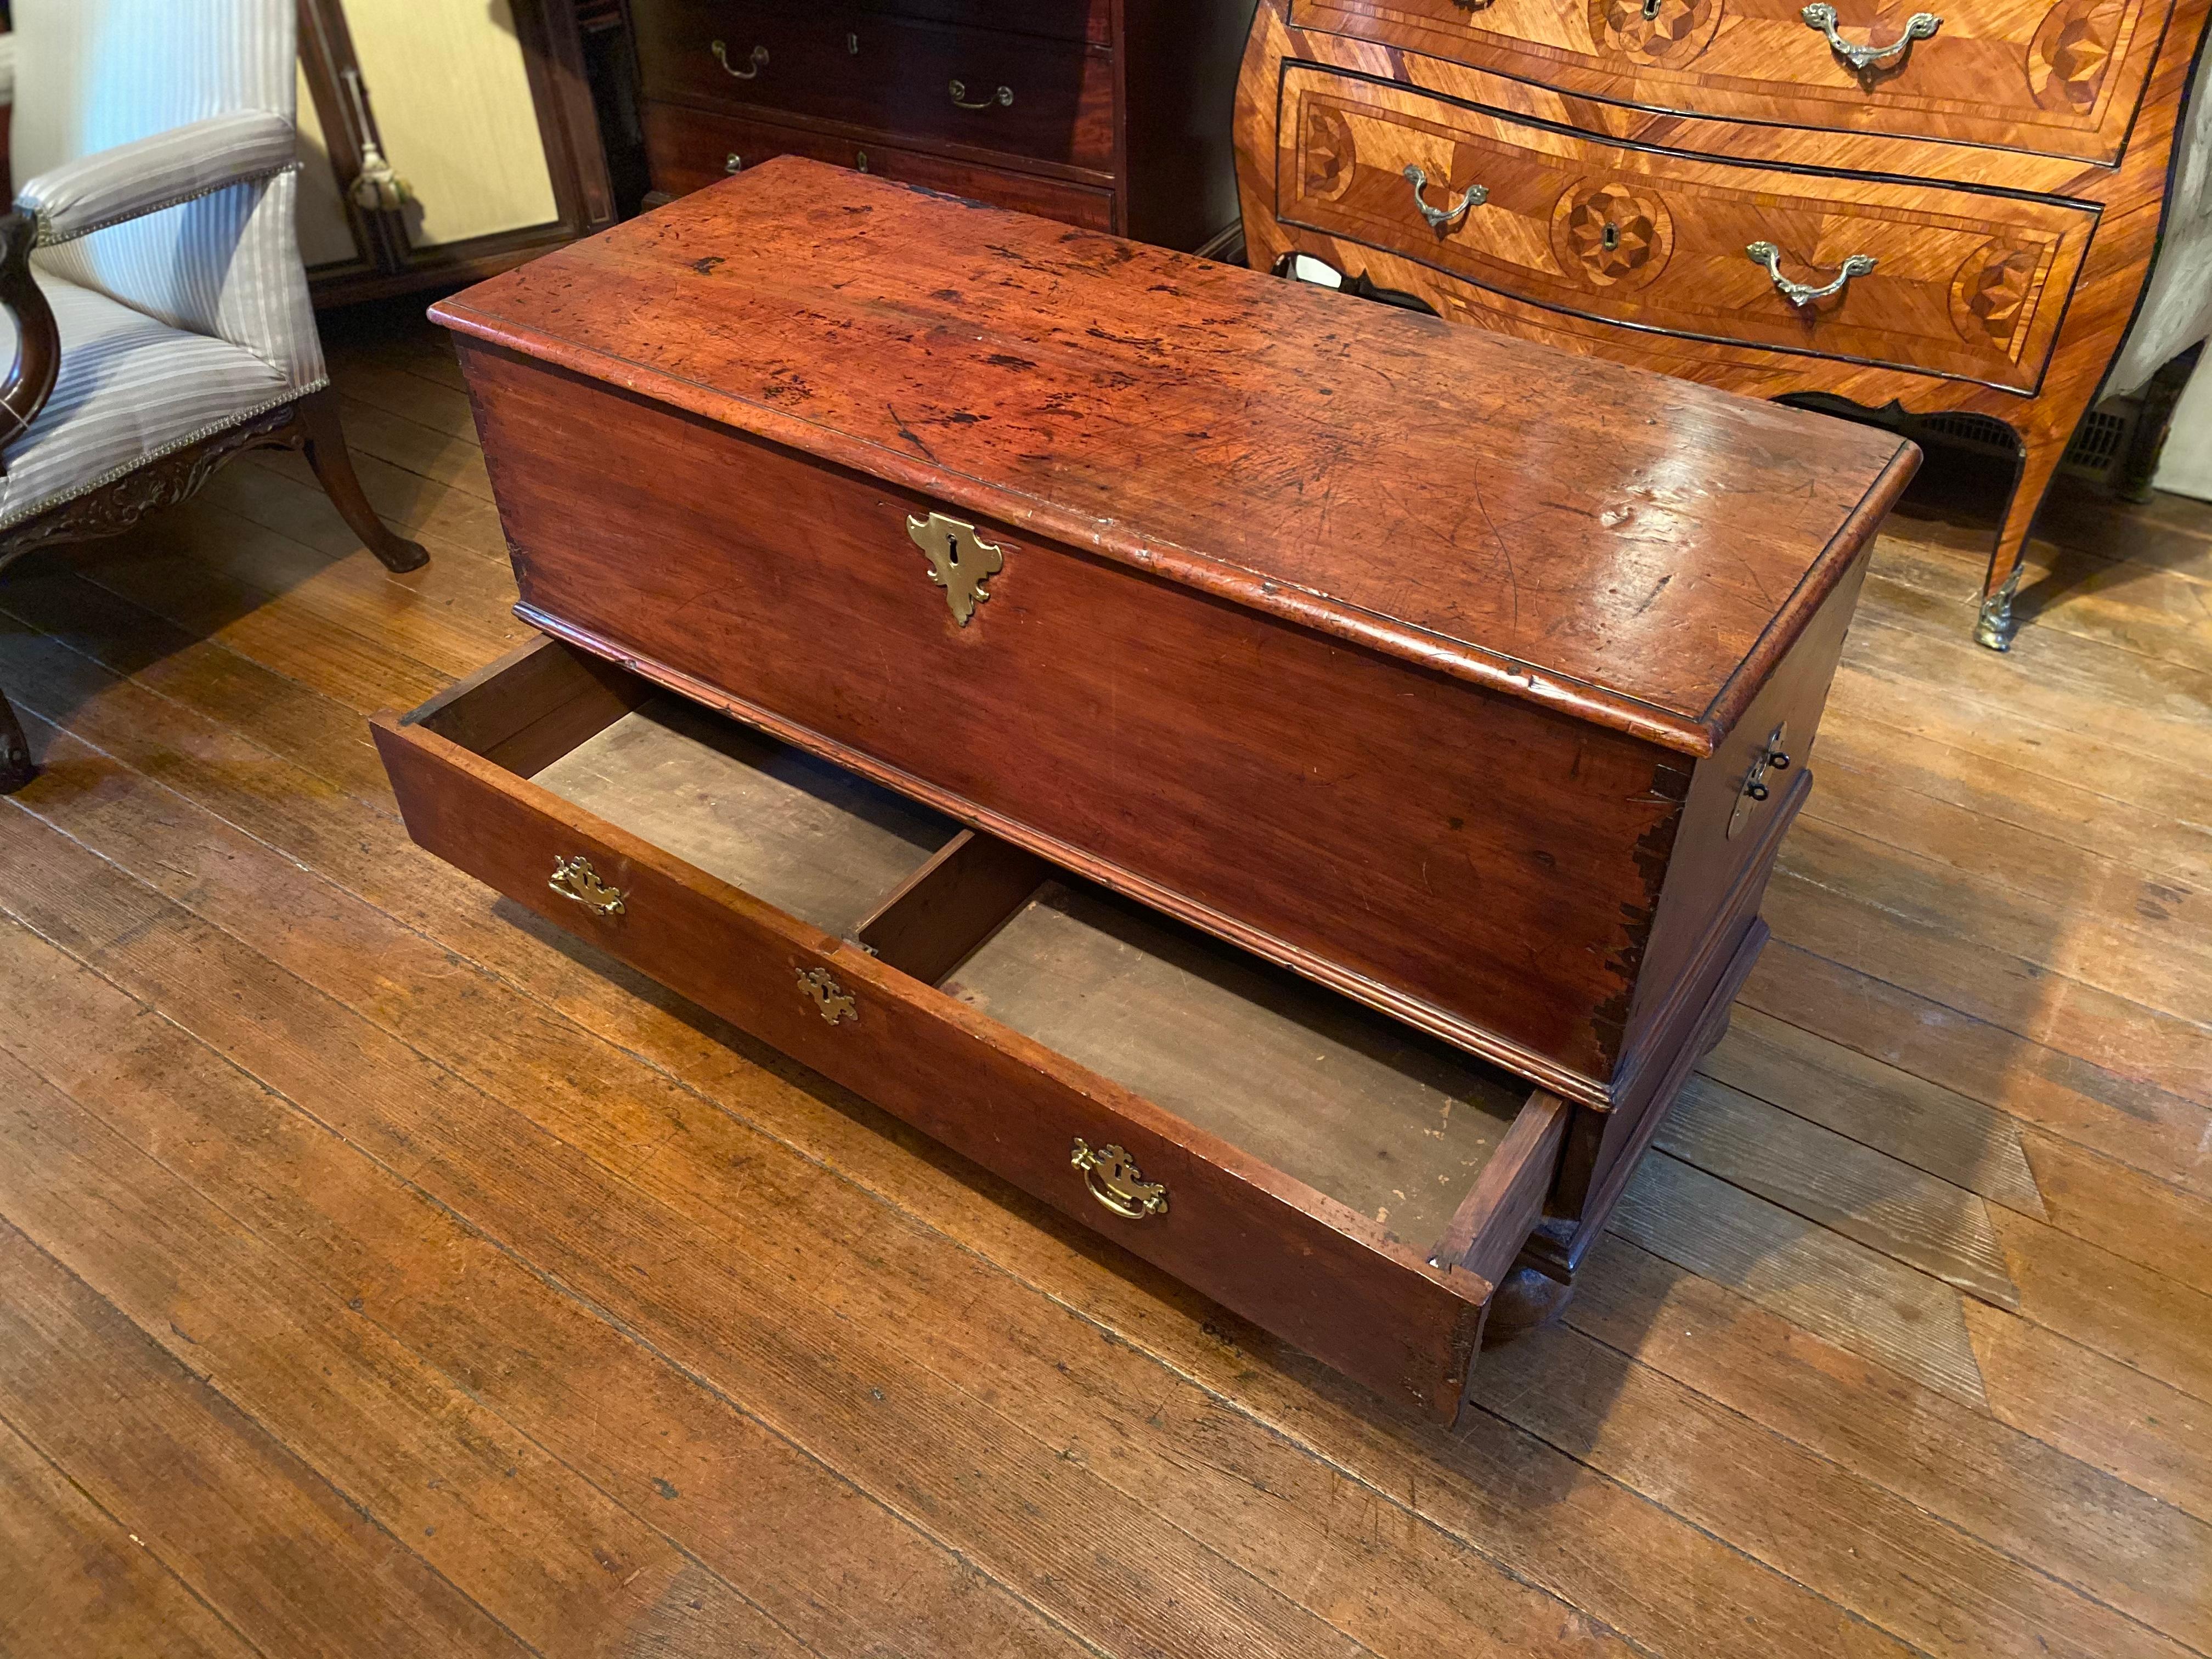 17th-Early 18th Century Bermuda Blanket Chest with Drawer and Bermuda Dovetails 1